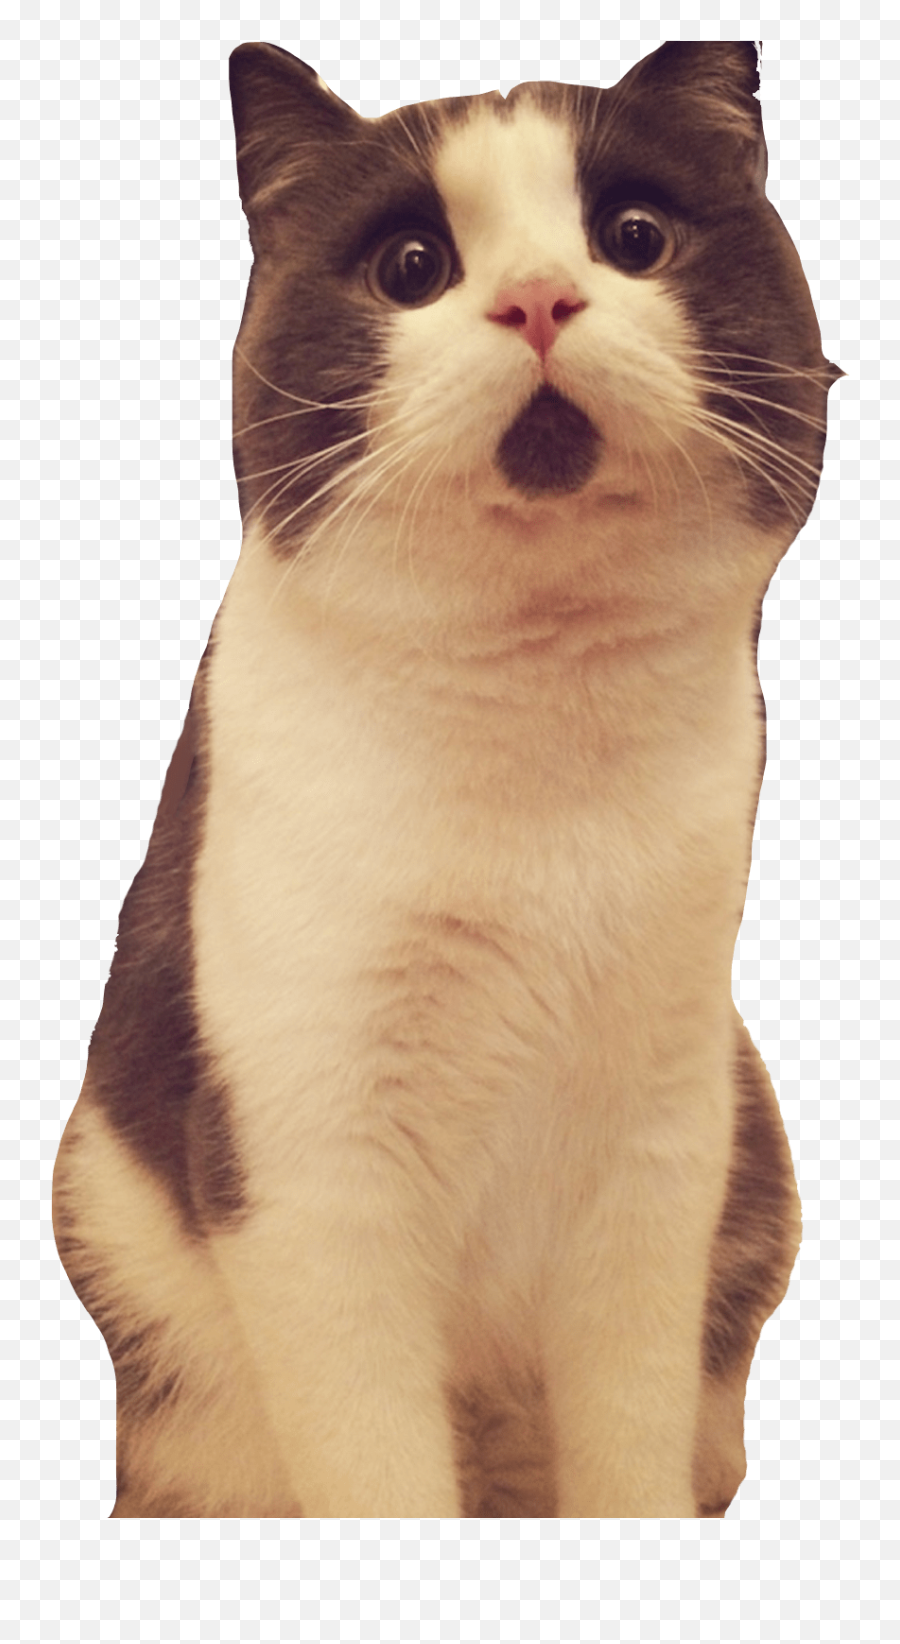 Cat Looking Up Transparent Png - Cat Looking Up Transparent,Transparent Cat